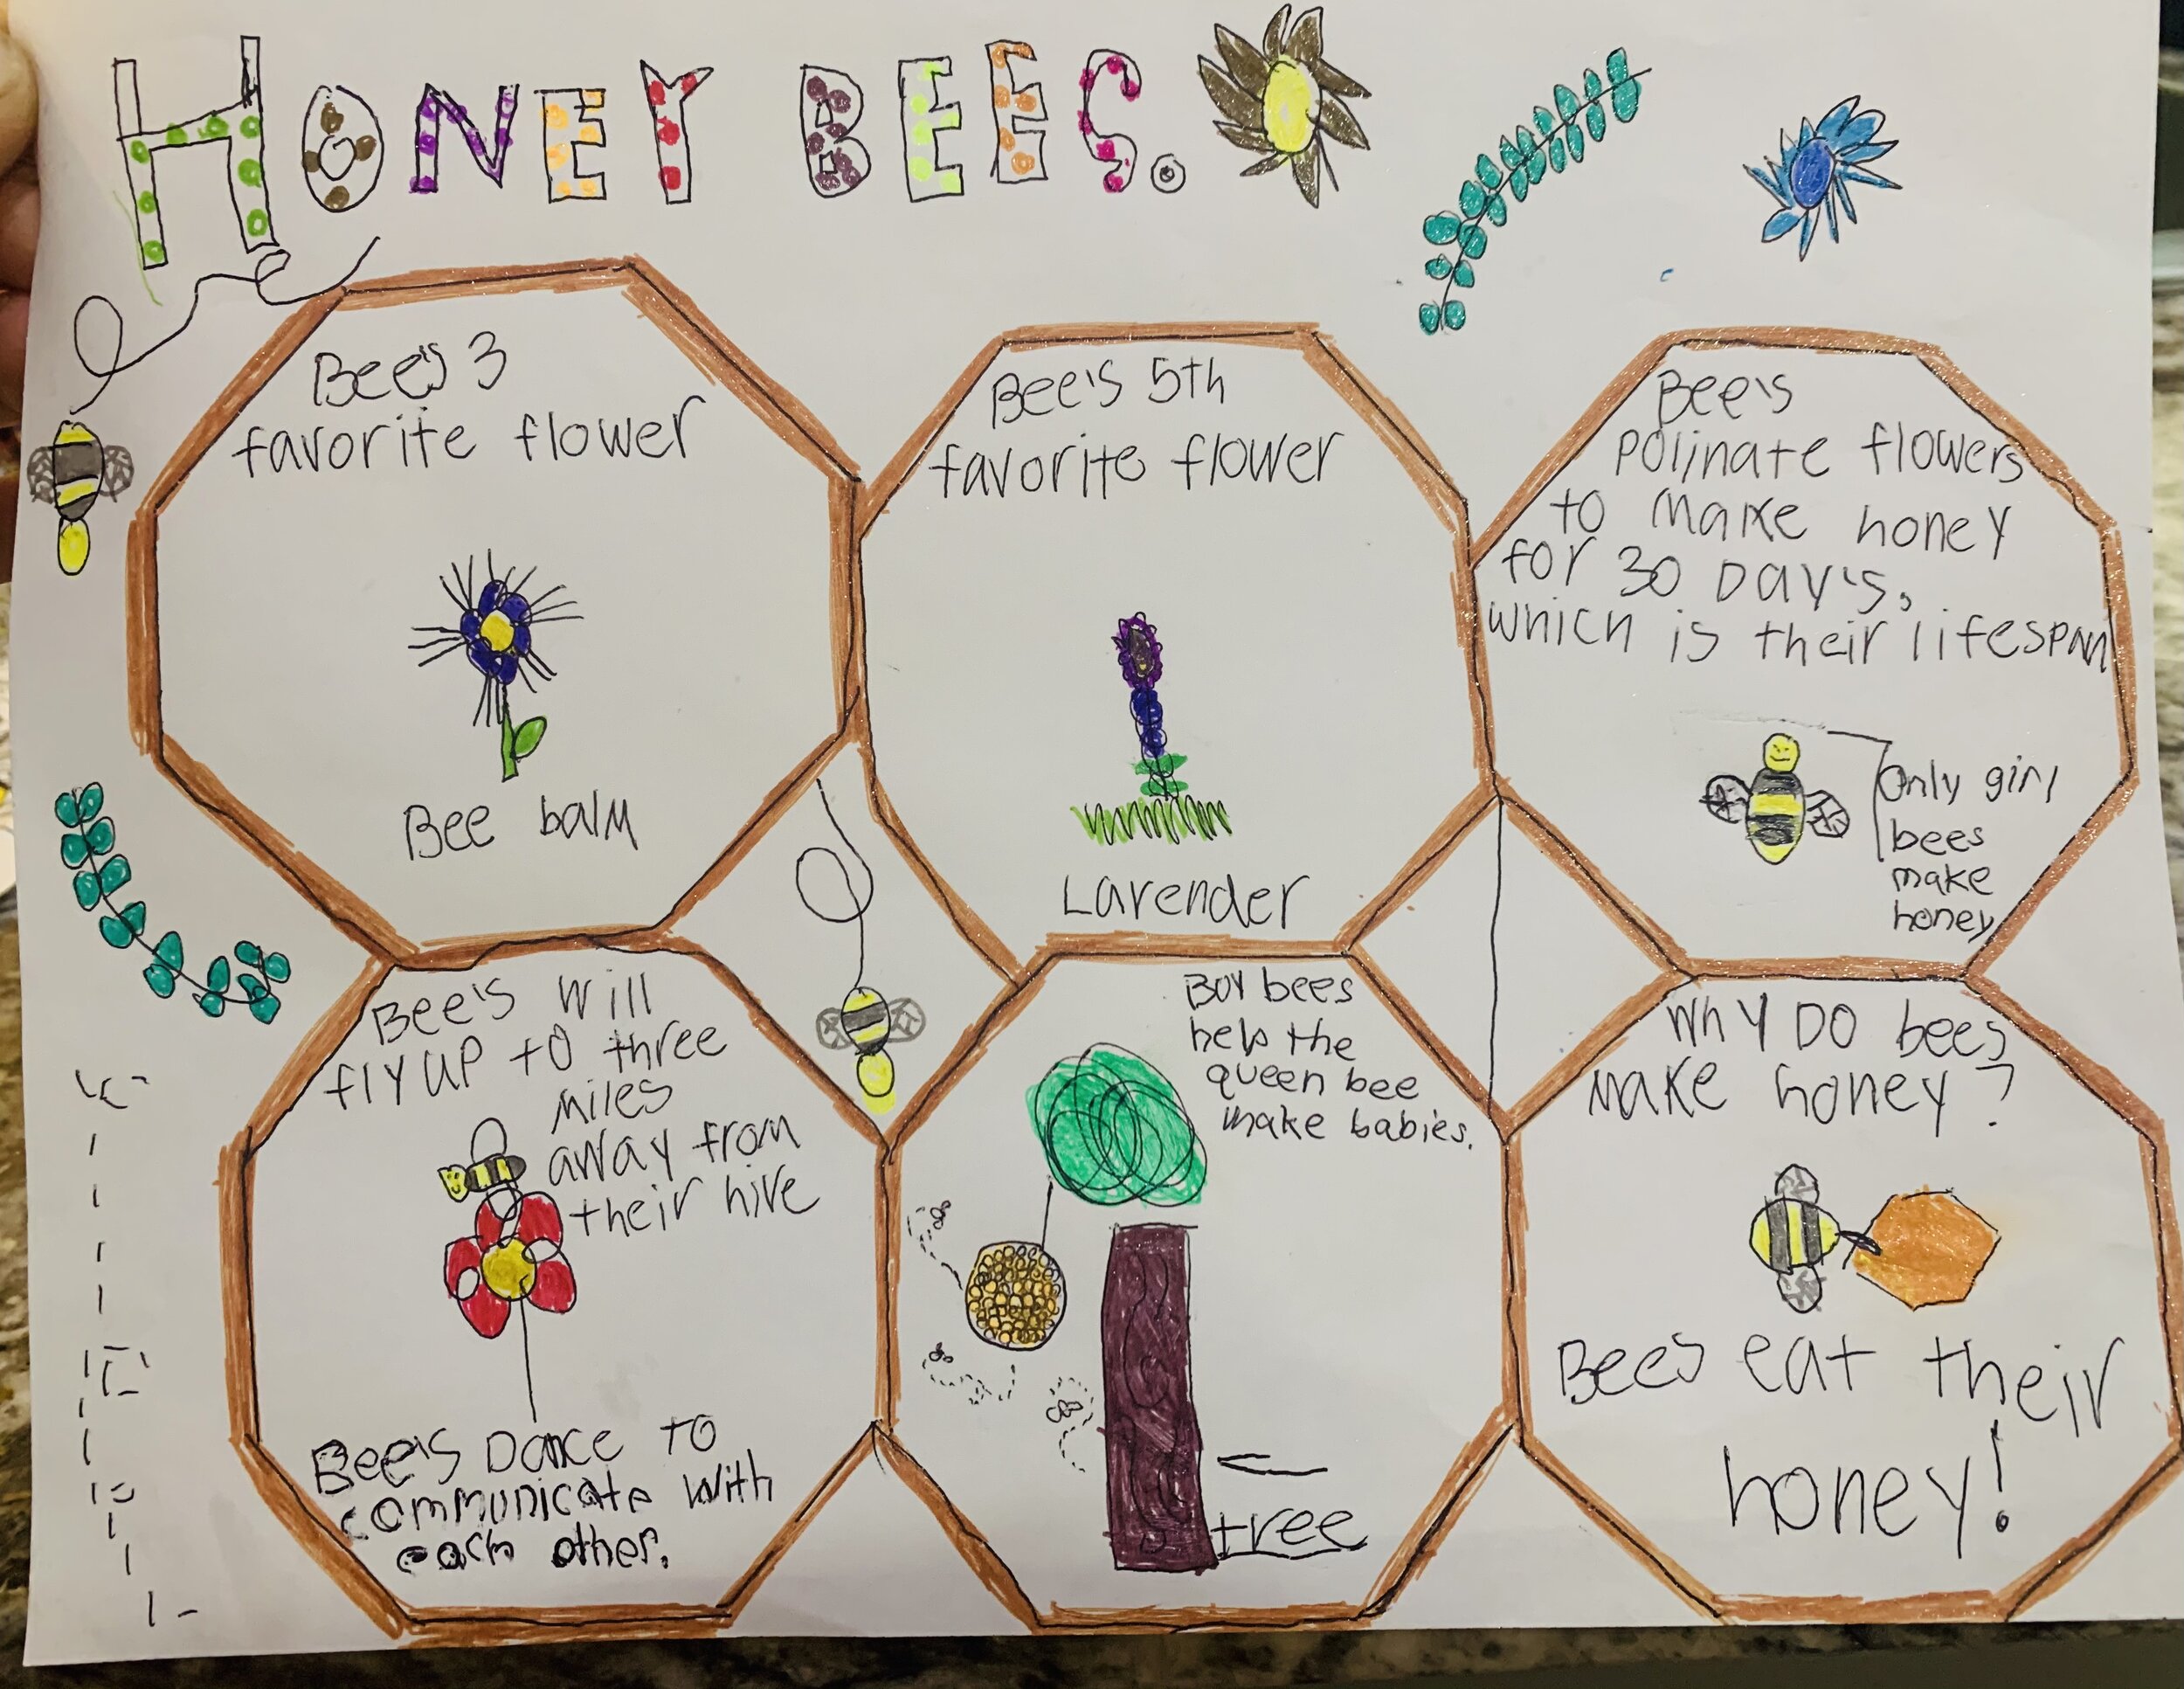 Life of Honeybees - by Lucy Boots - 1st Place - Grades 1-2